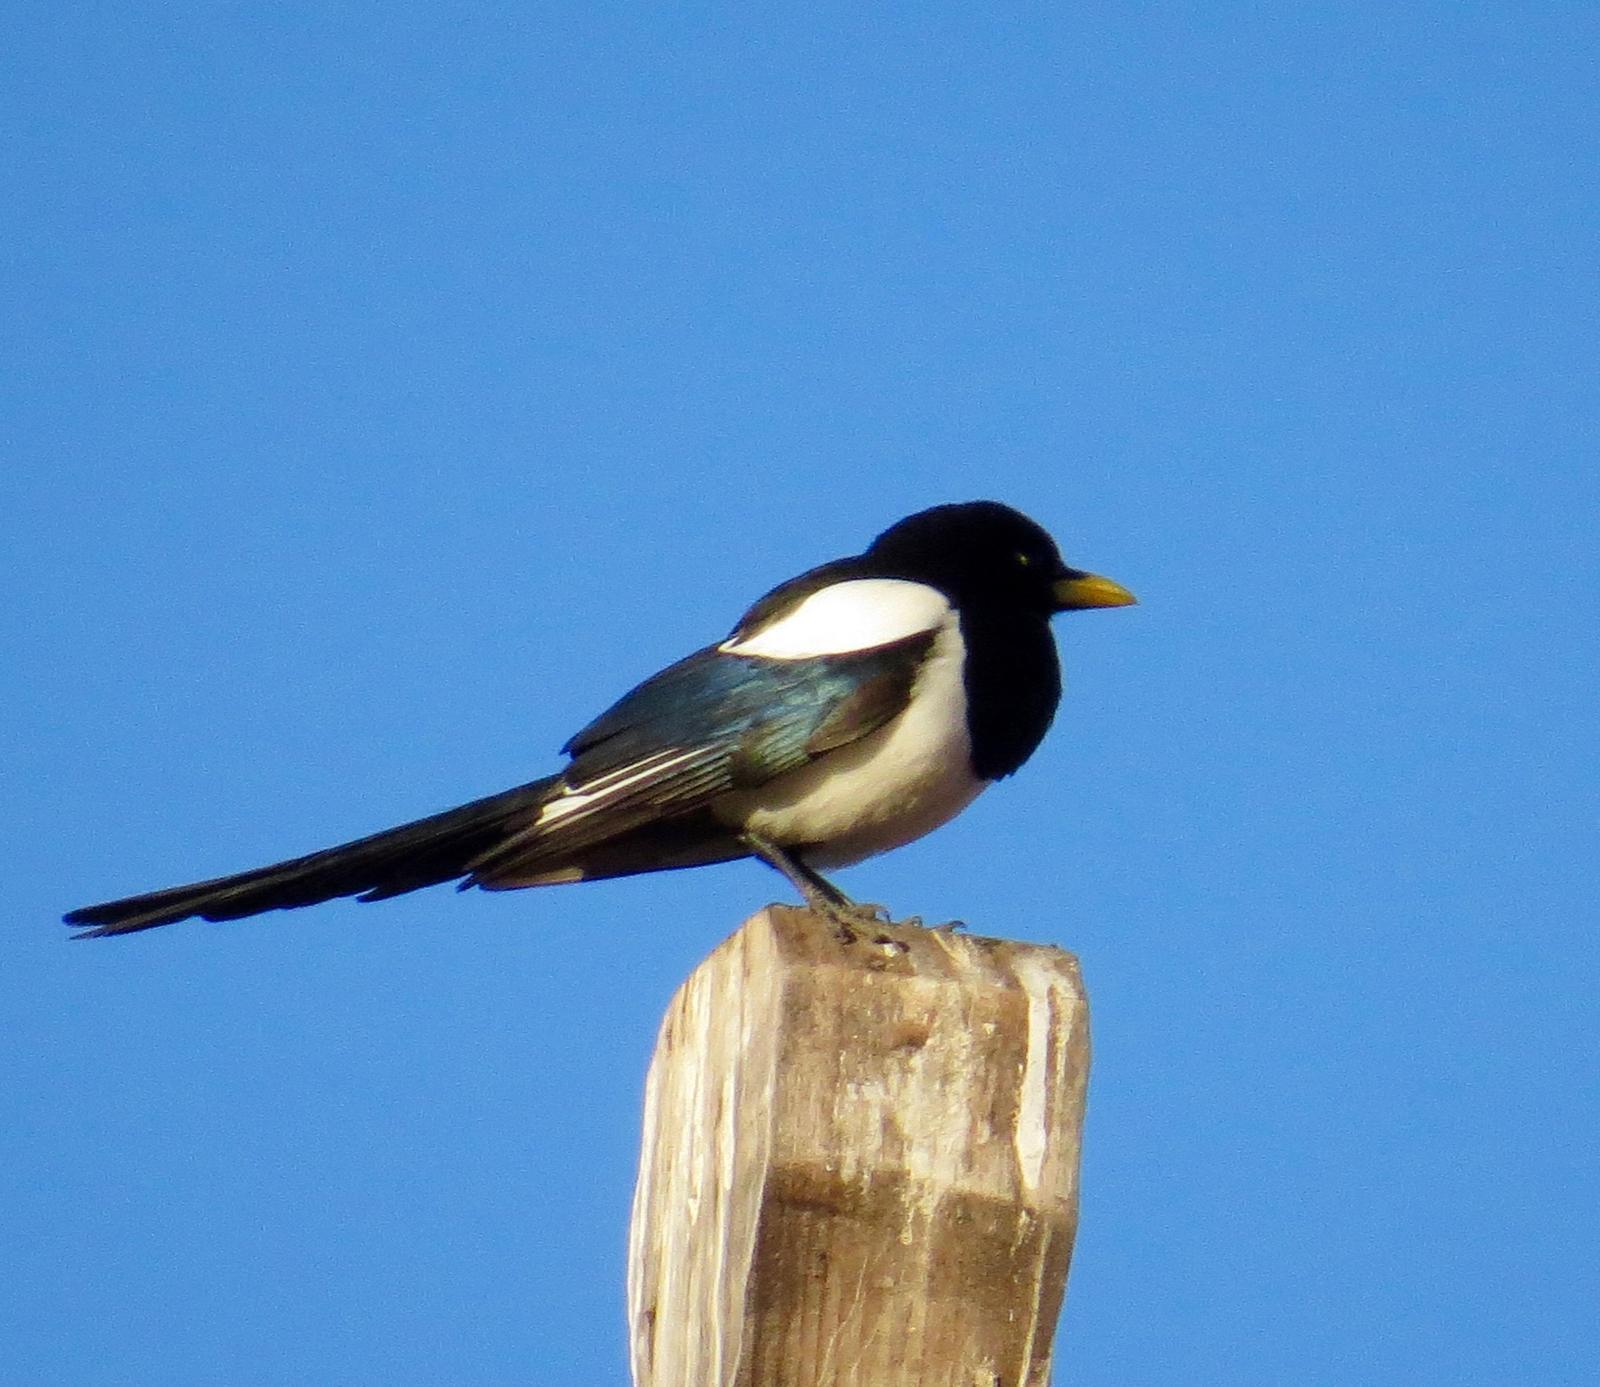 Yellow-billed Magpie Photo by Don Glasco